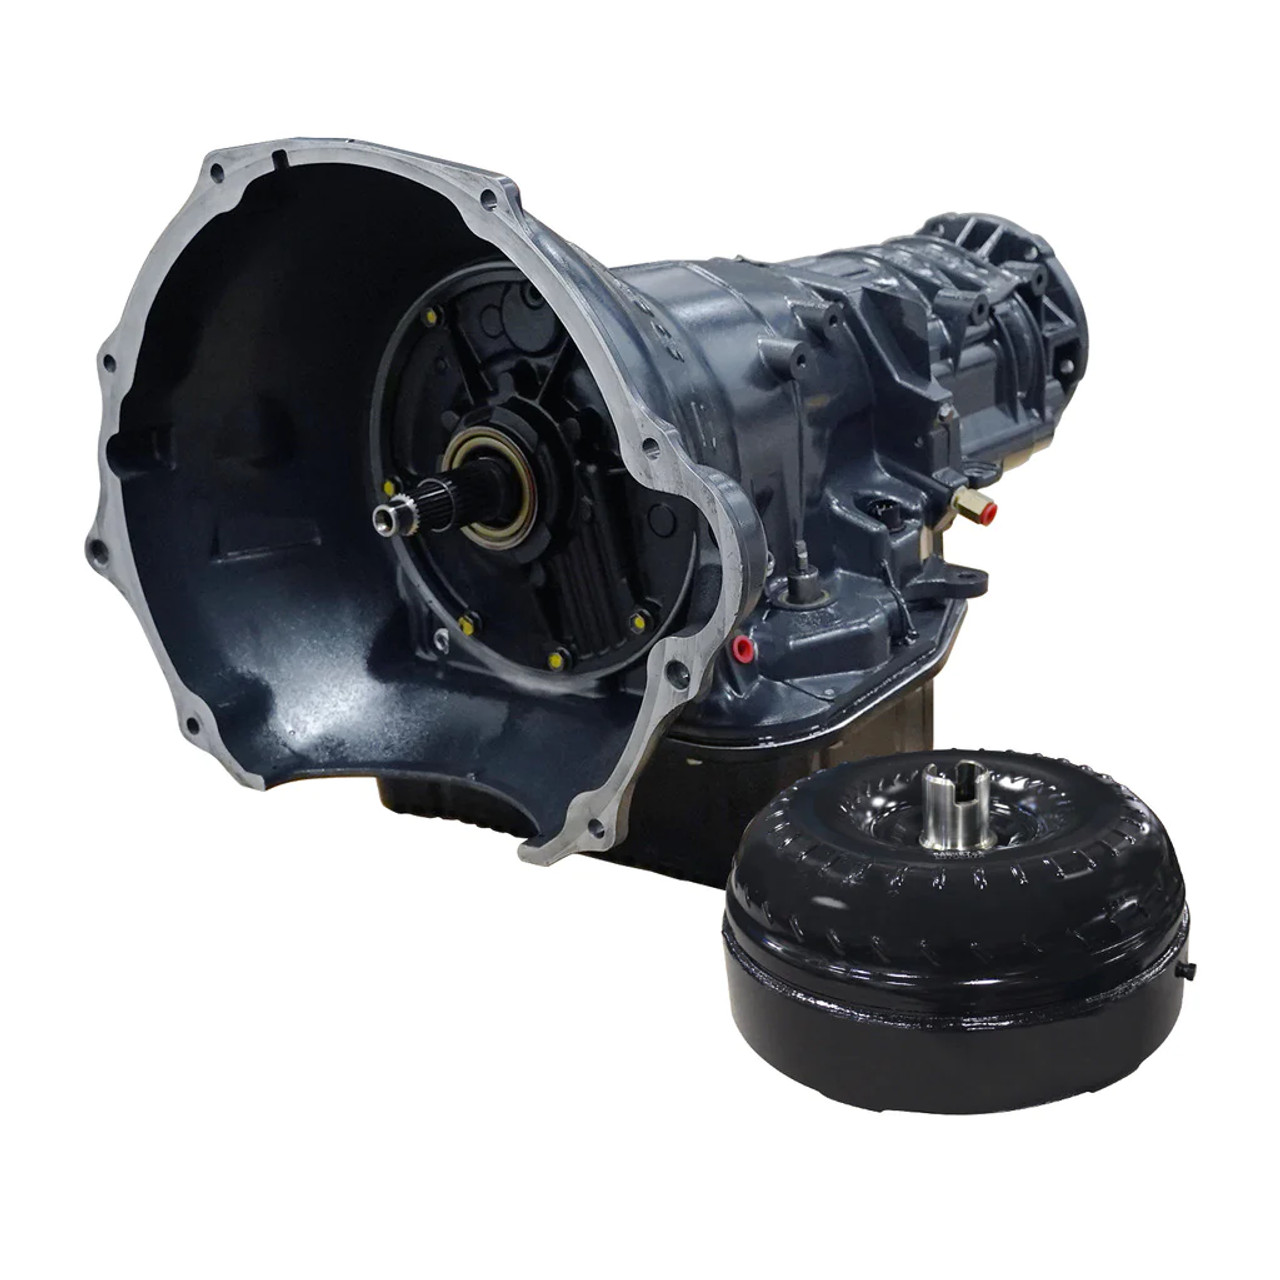 BD ROADMASTER DODGE 48RE TRANSMISSION & CONVERTER PACKAGE for 2005 to 2007 Dodge 5.9L Cummins 2WD (1064202SS) Main View